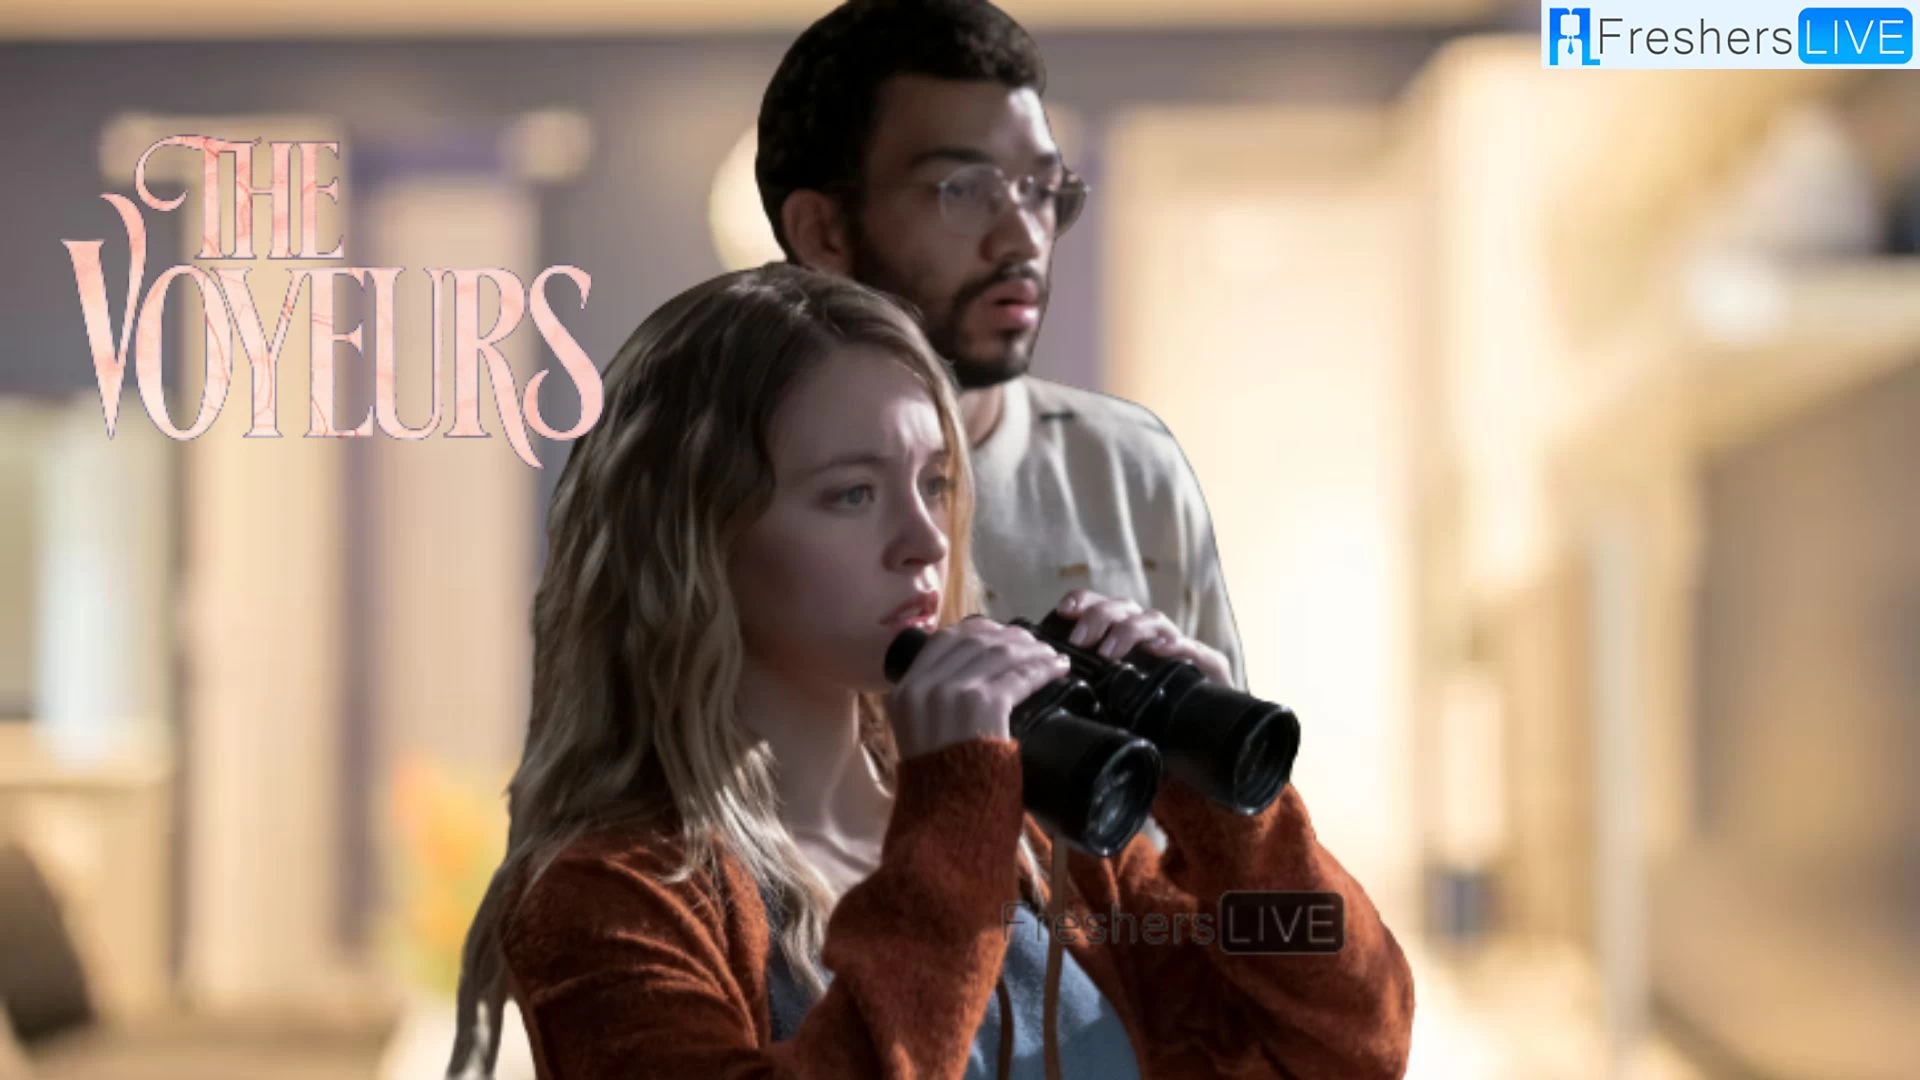 The Voyeurs Ending Explained, Release Date, Cast, Summary, Review, Where to Watch and More